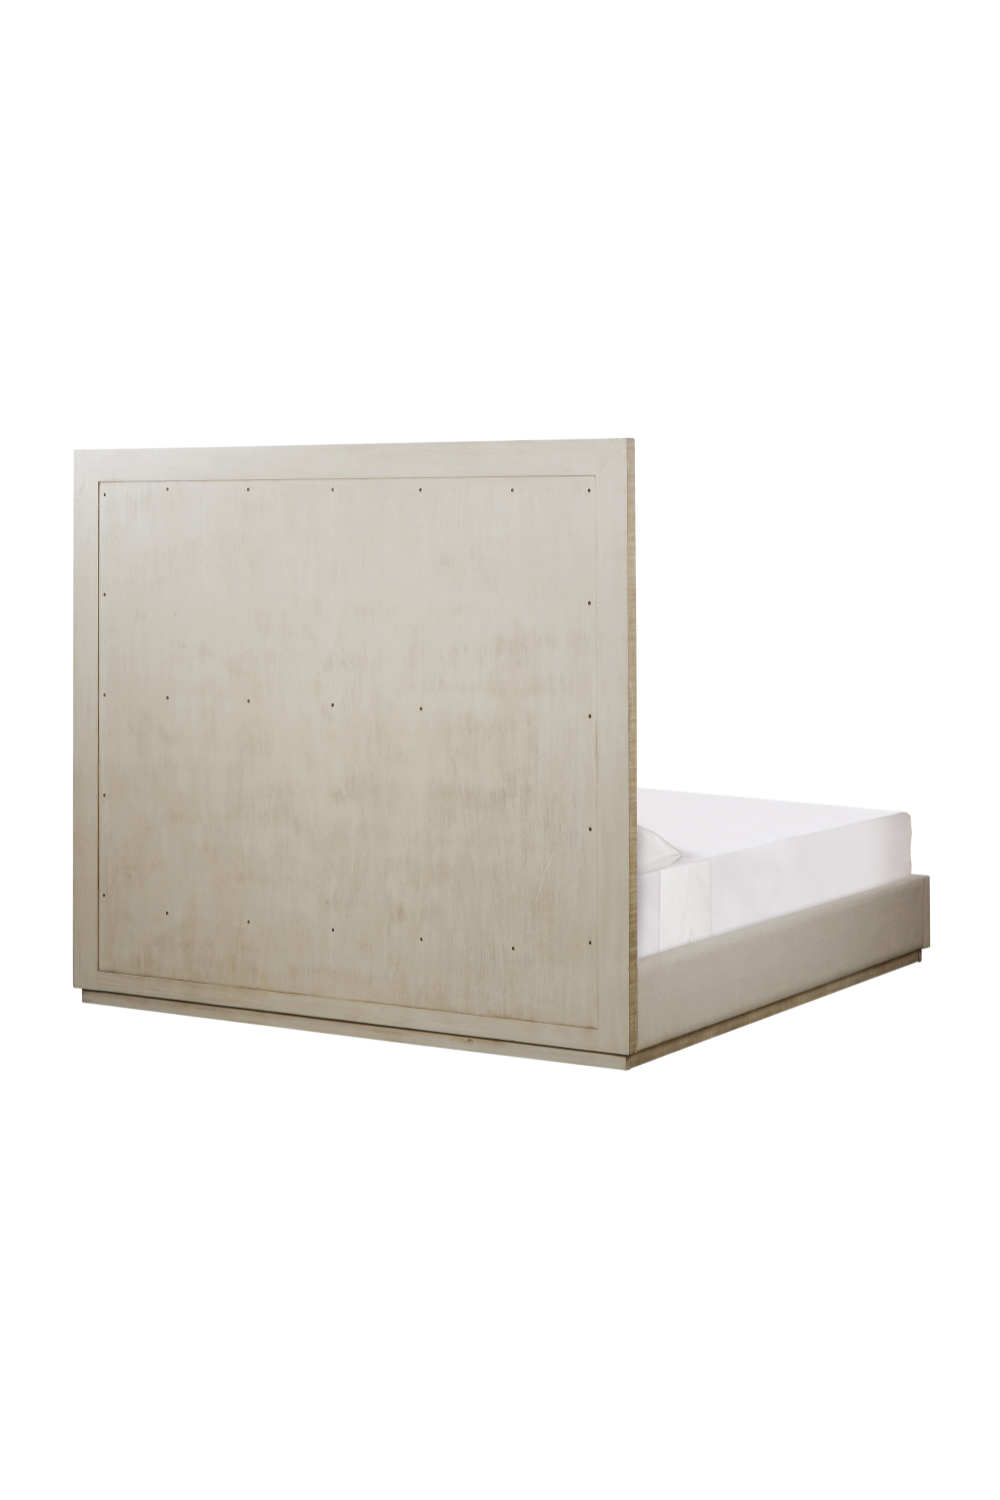 Ivory Textured Ash Queen Bed | Andrew Martin Raffles | OROA